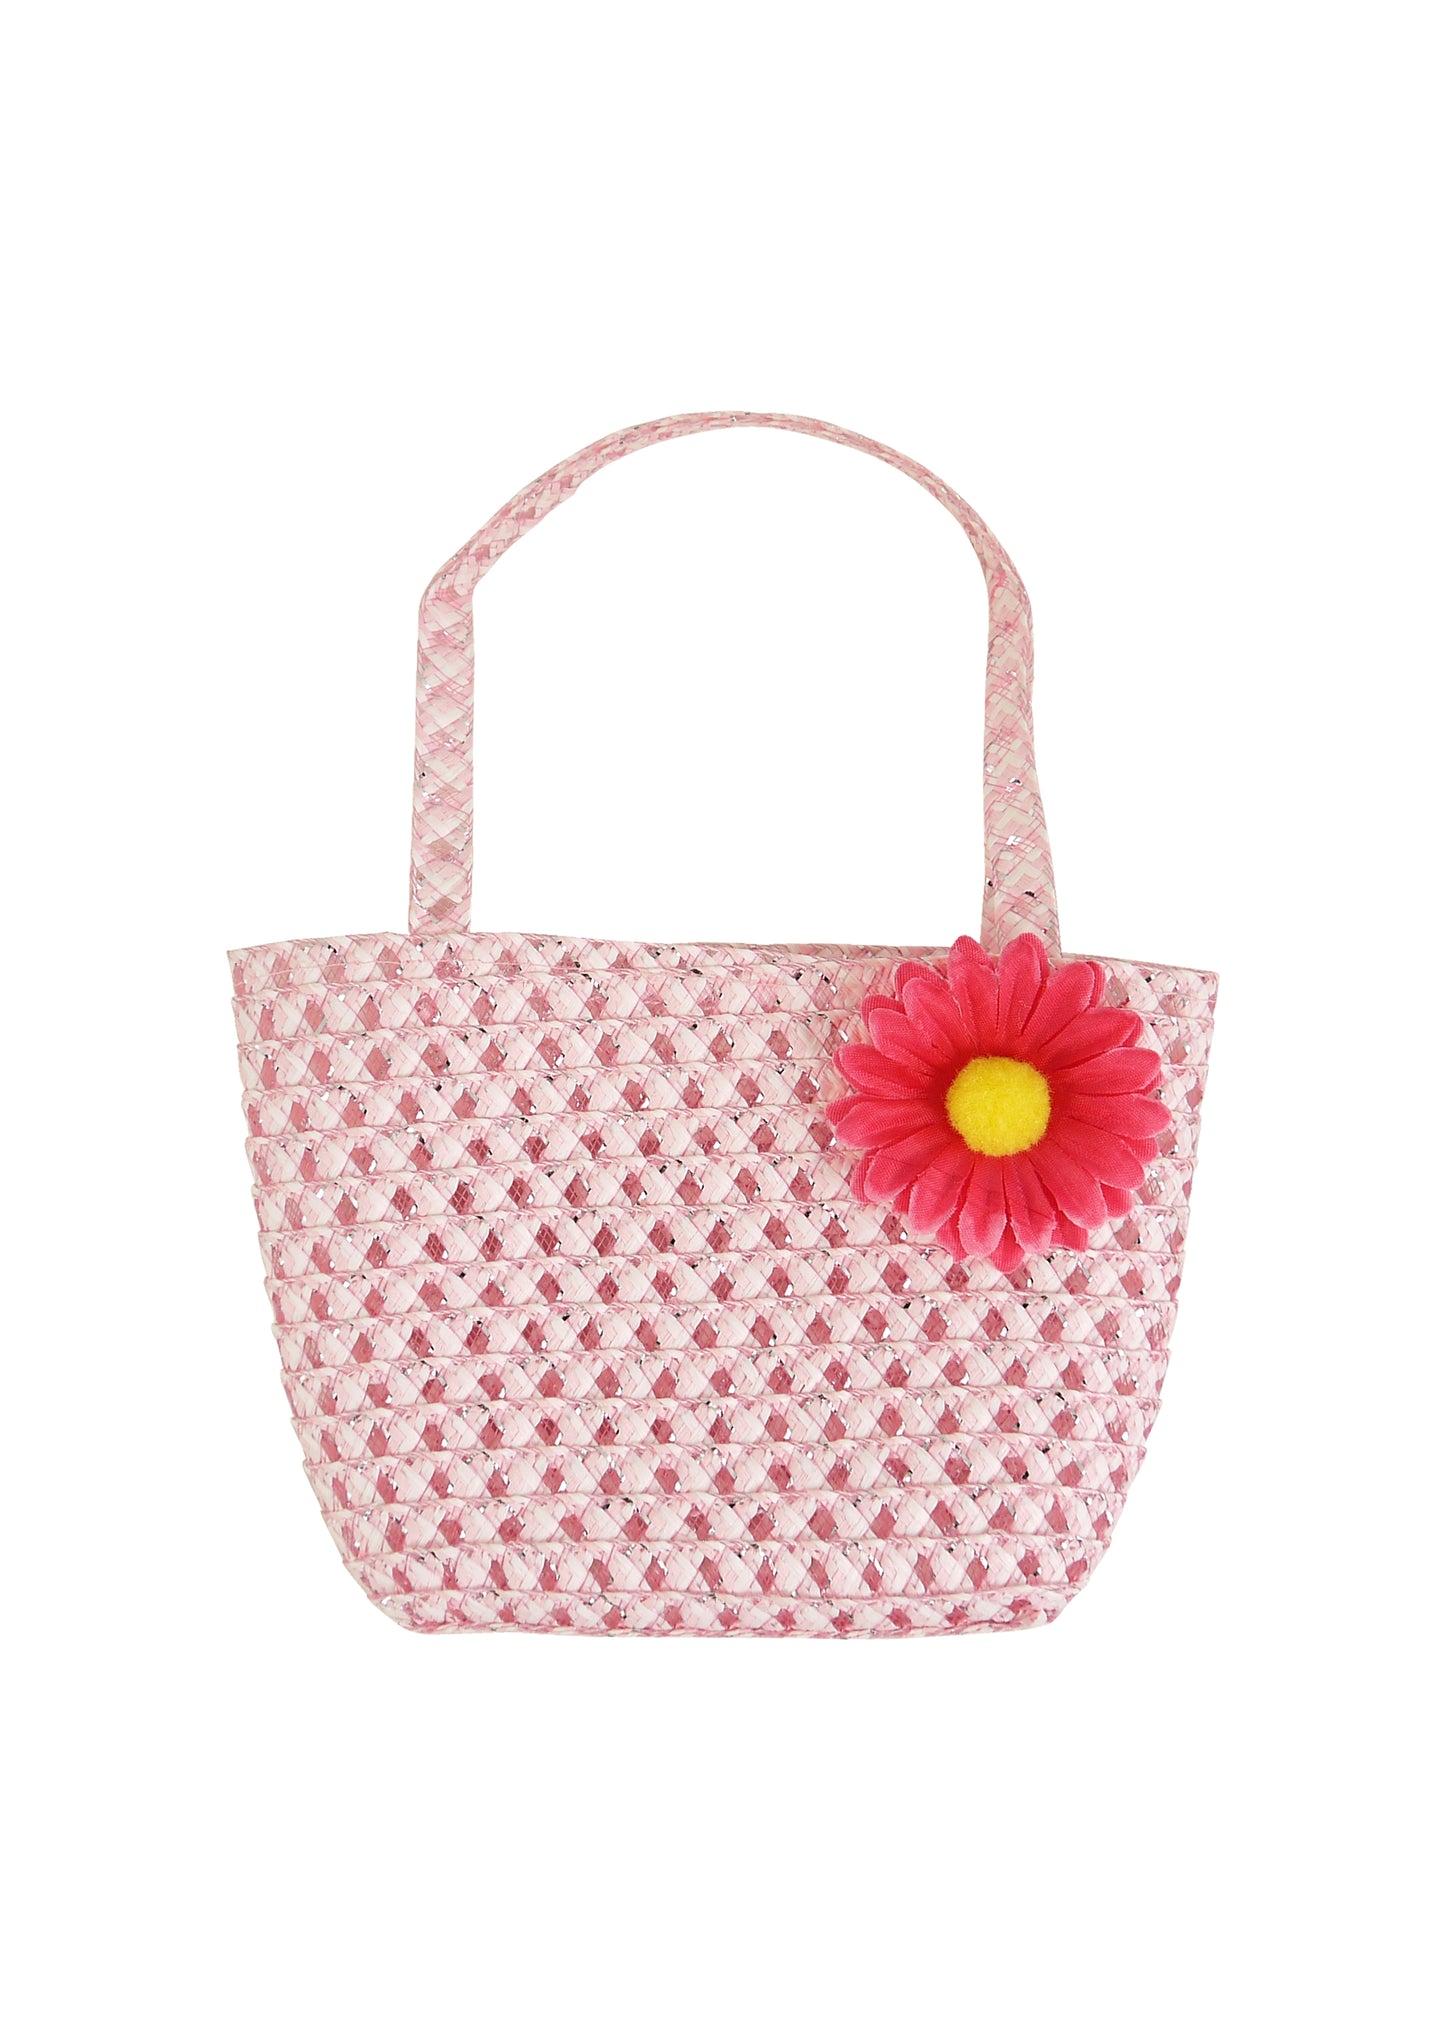 Girls Pink Woven Bag with Flower